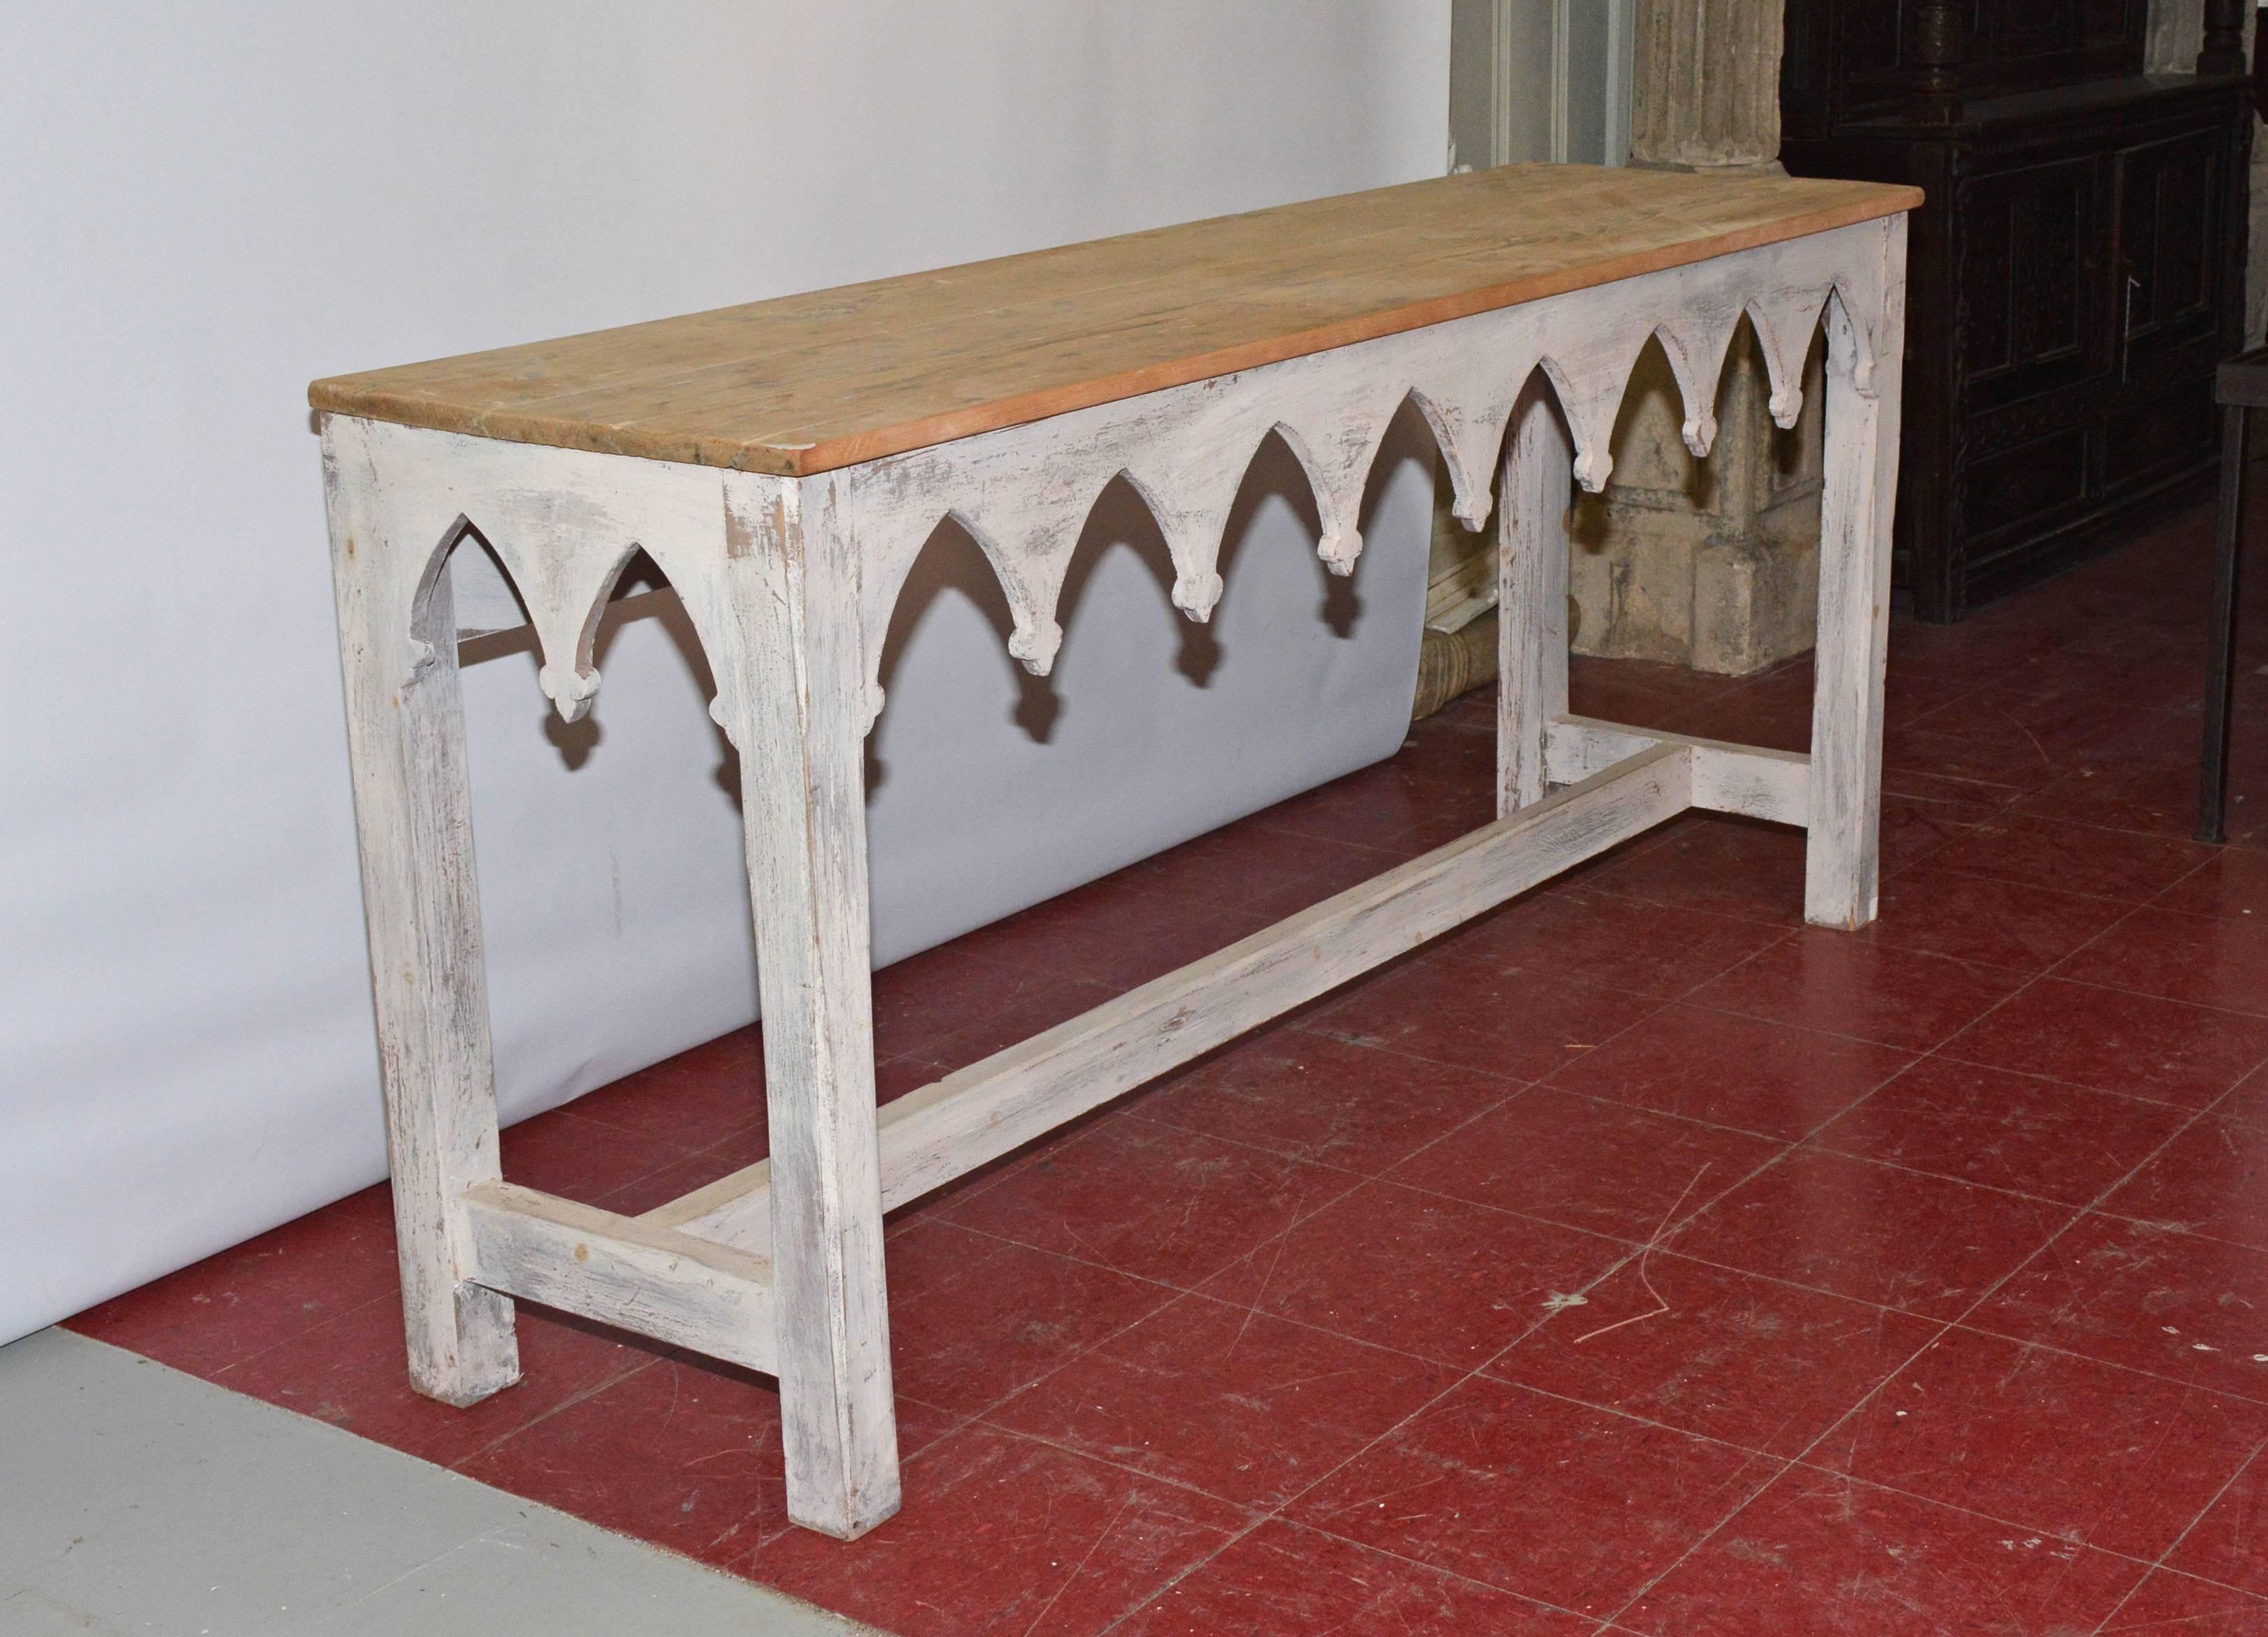 Handcrafted in the Regency-style, the sturdy rustic console or sofa table has an apron of neo-gothic arches and legs painted white and a sanded wood top.